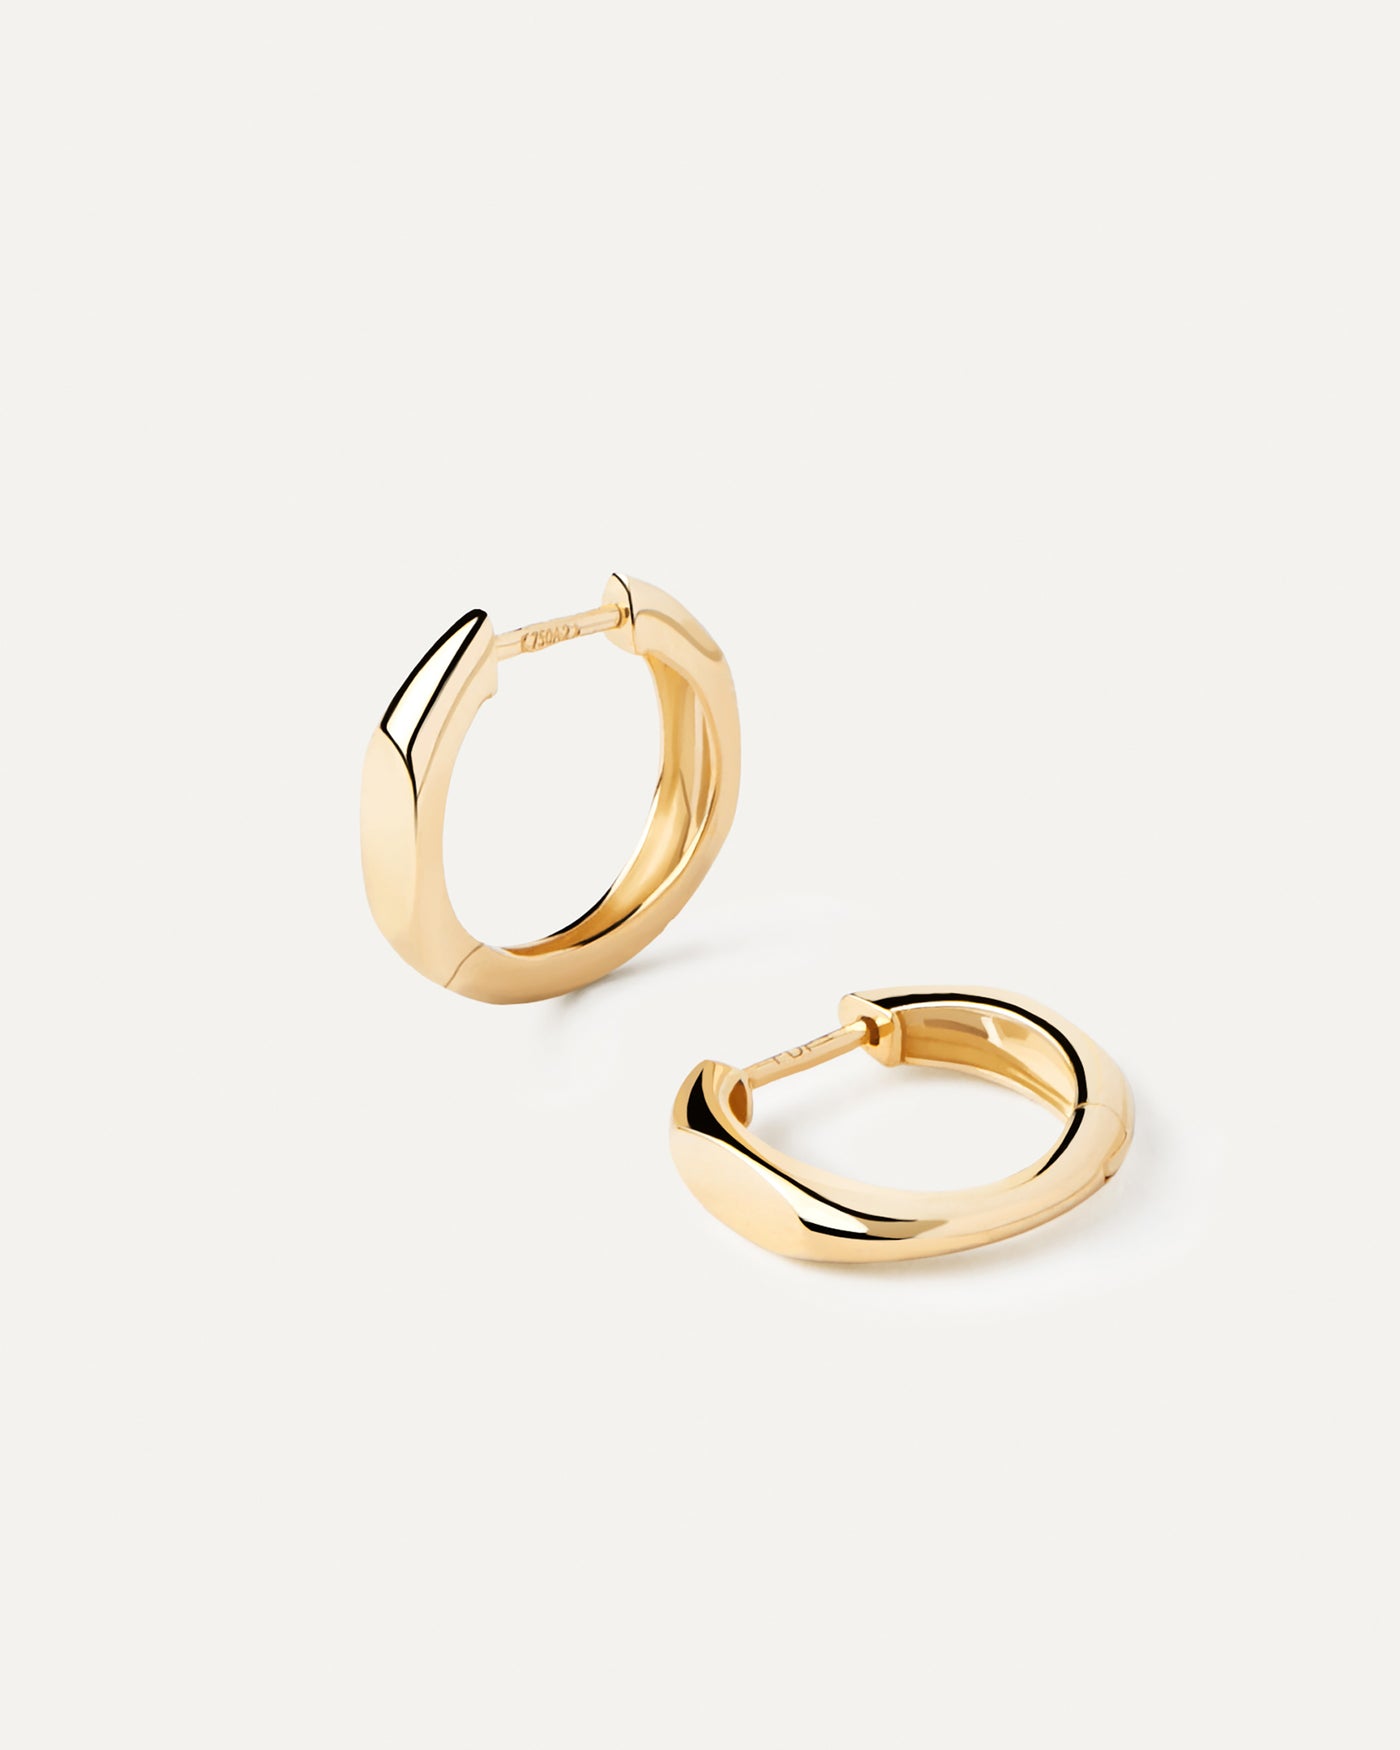 2023 Selection | Gold Memoir Hoops. Straight-sided hoop earrings in solid yellow gold. Get the latest arrival from PDPAOLA. Place your order safely and get this Best Seller. Free Shipping.